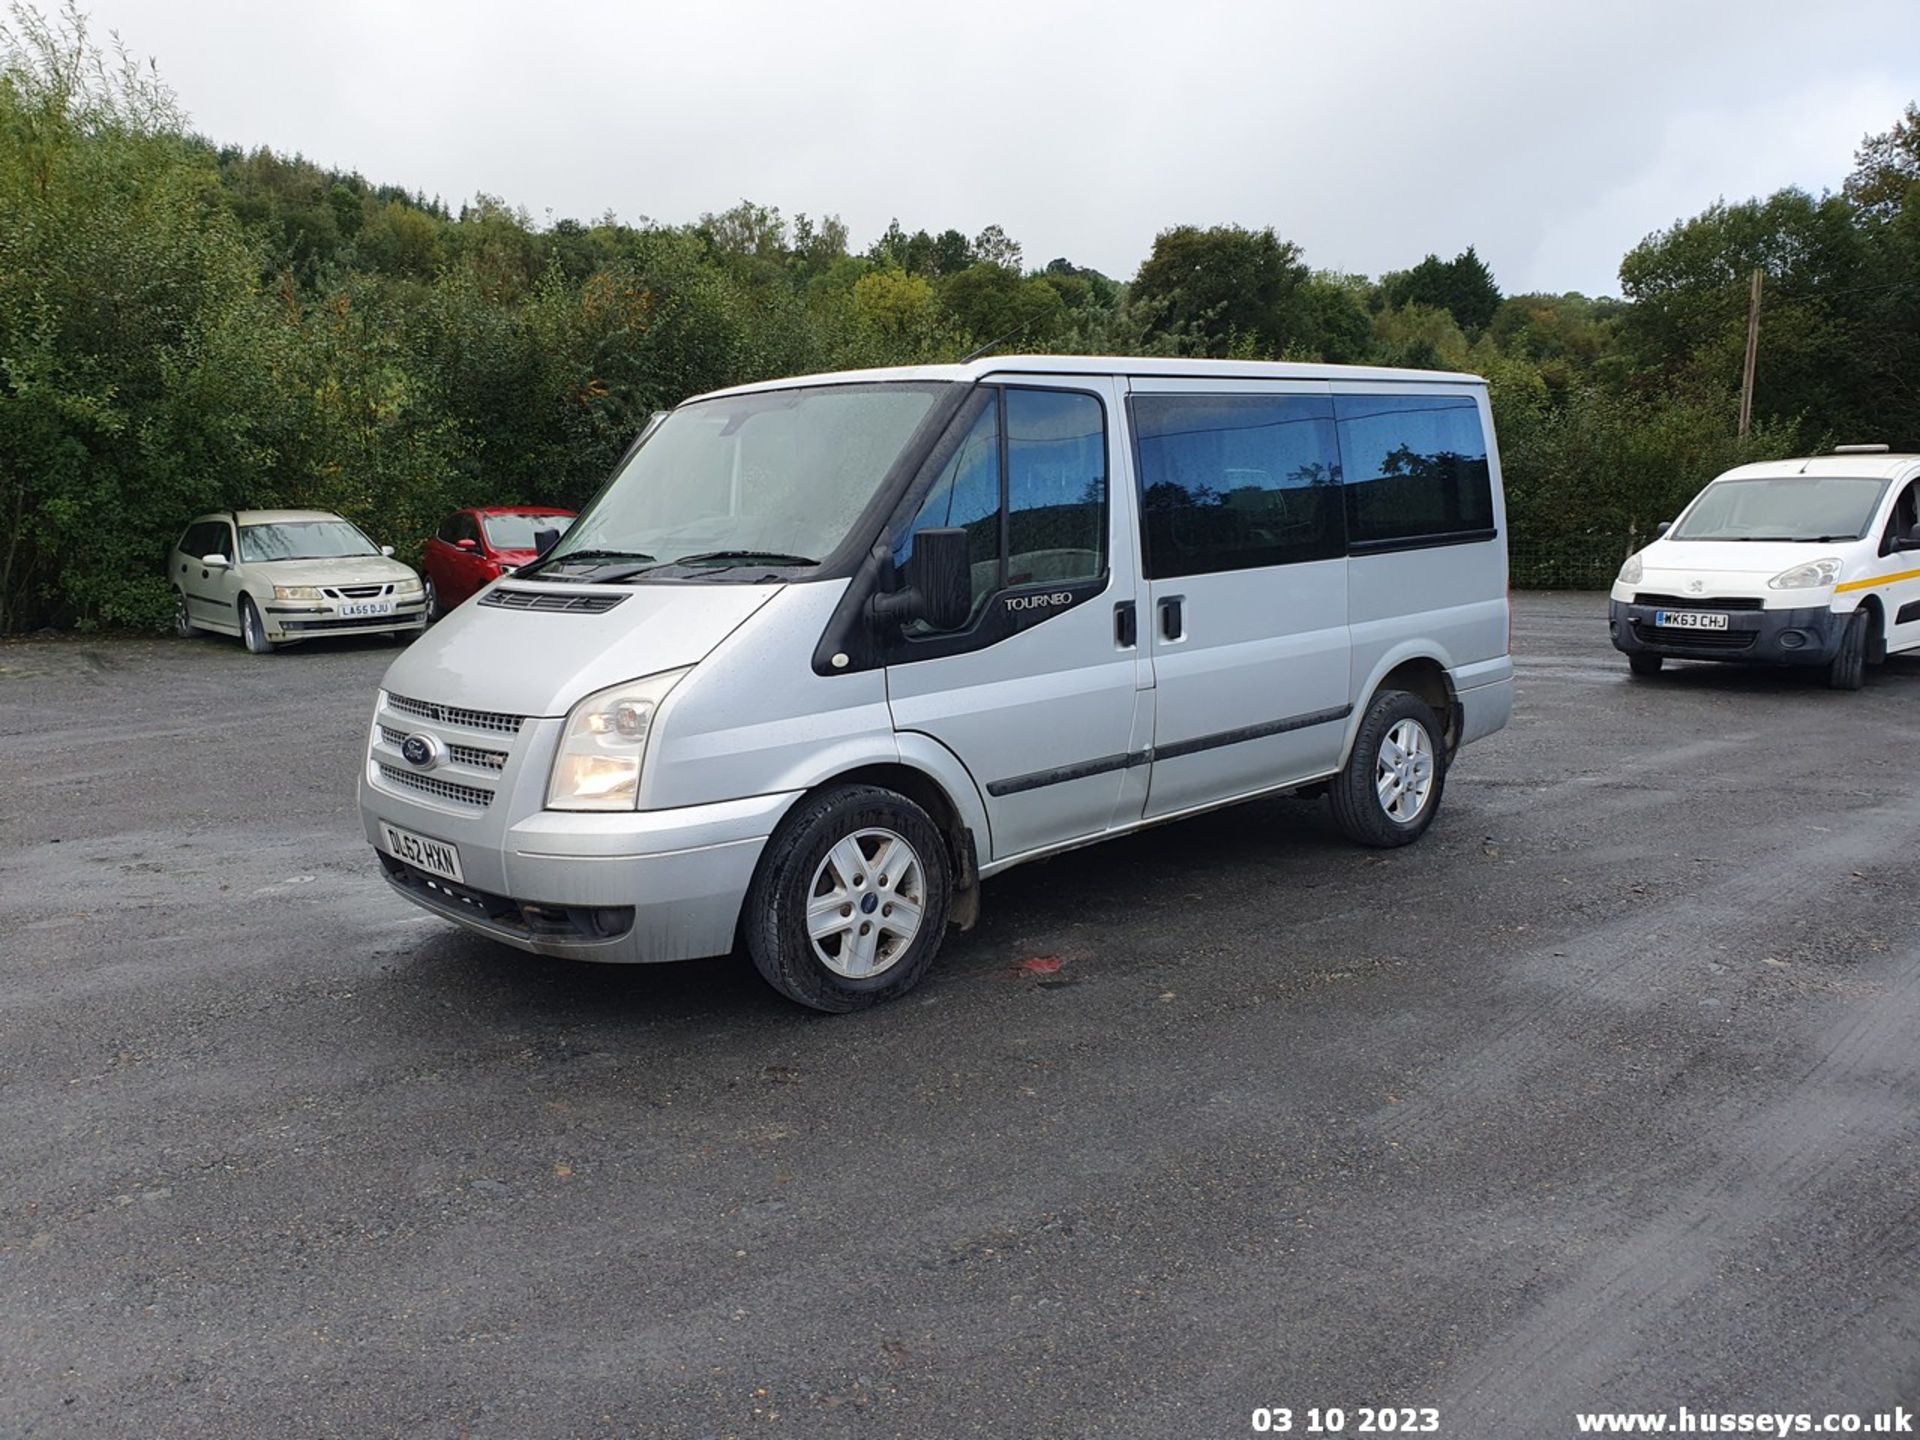 13/62 FORD TRANSIT 125 T280 FWD - 2198cc 5dr MPV (Silver, 146k) - Image 5 of 65